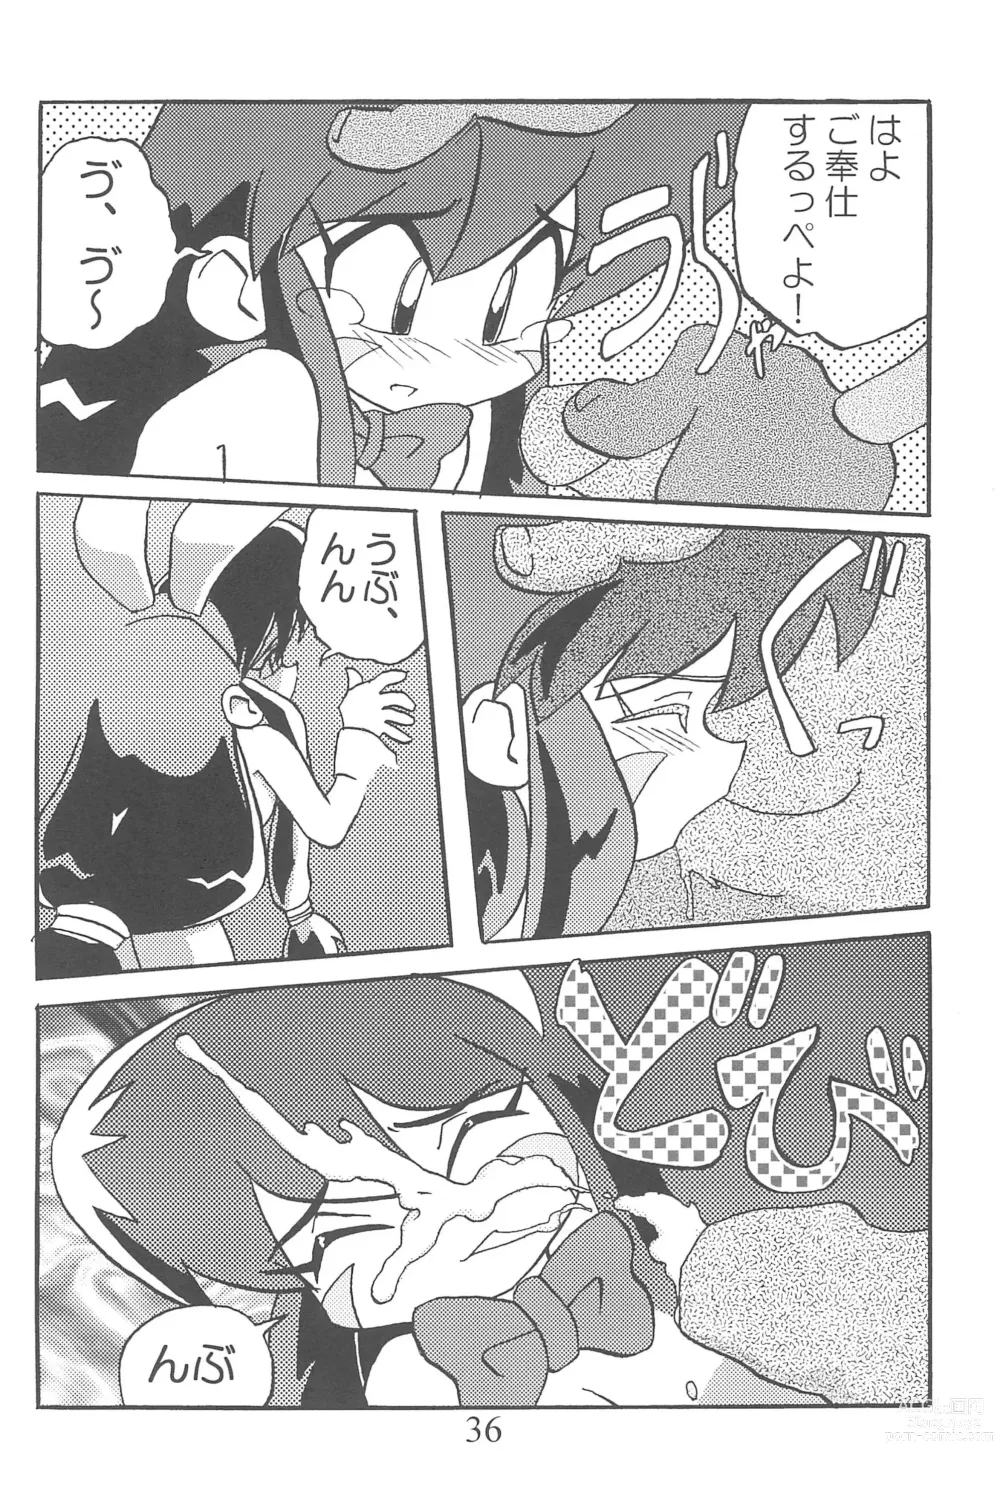 Page 36 of doujinshi Amuse-gueule